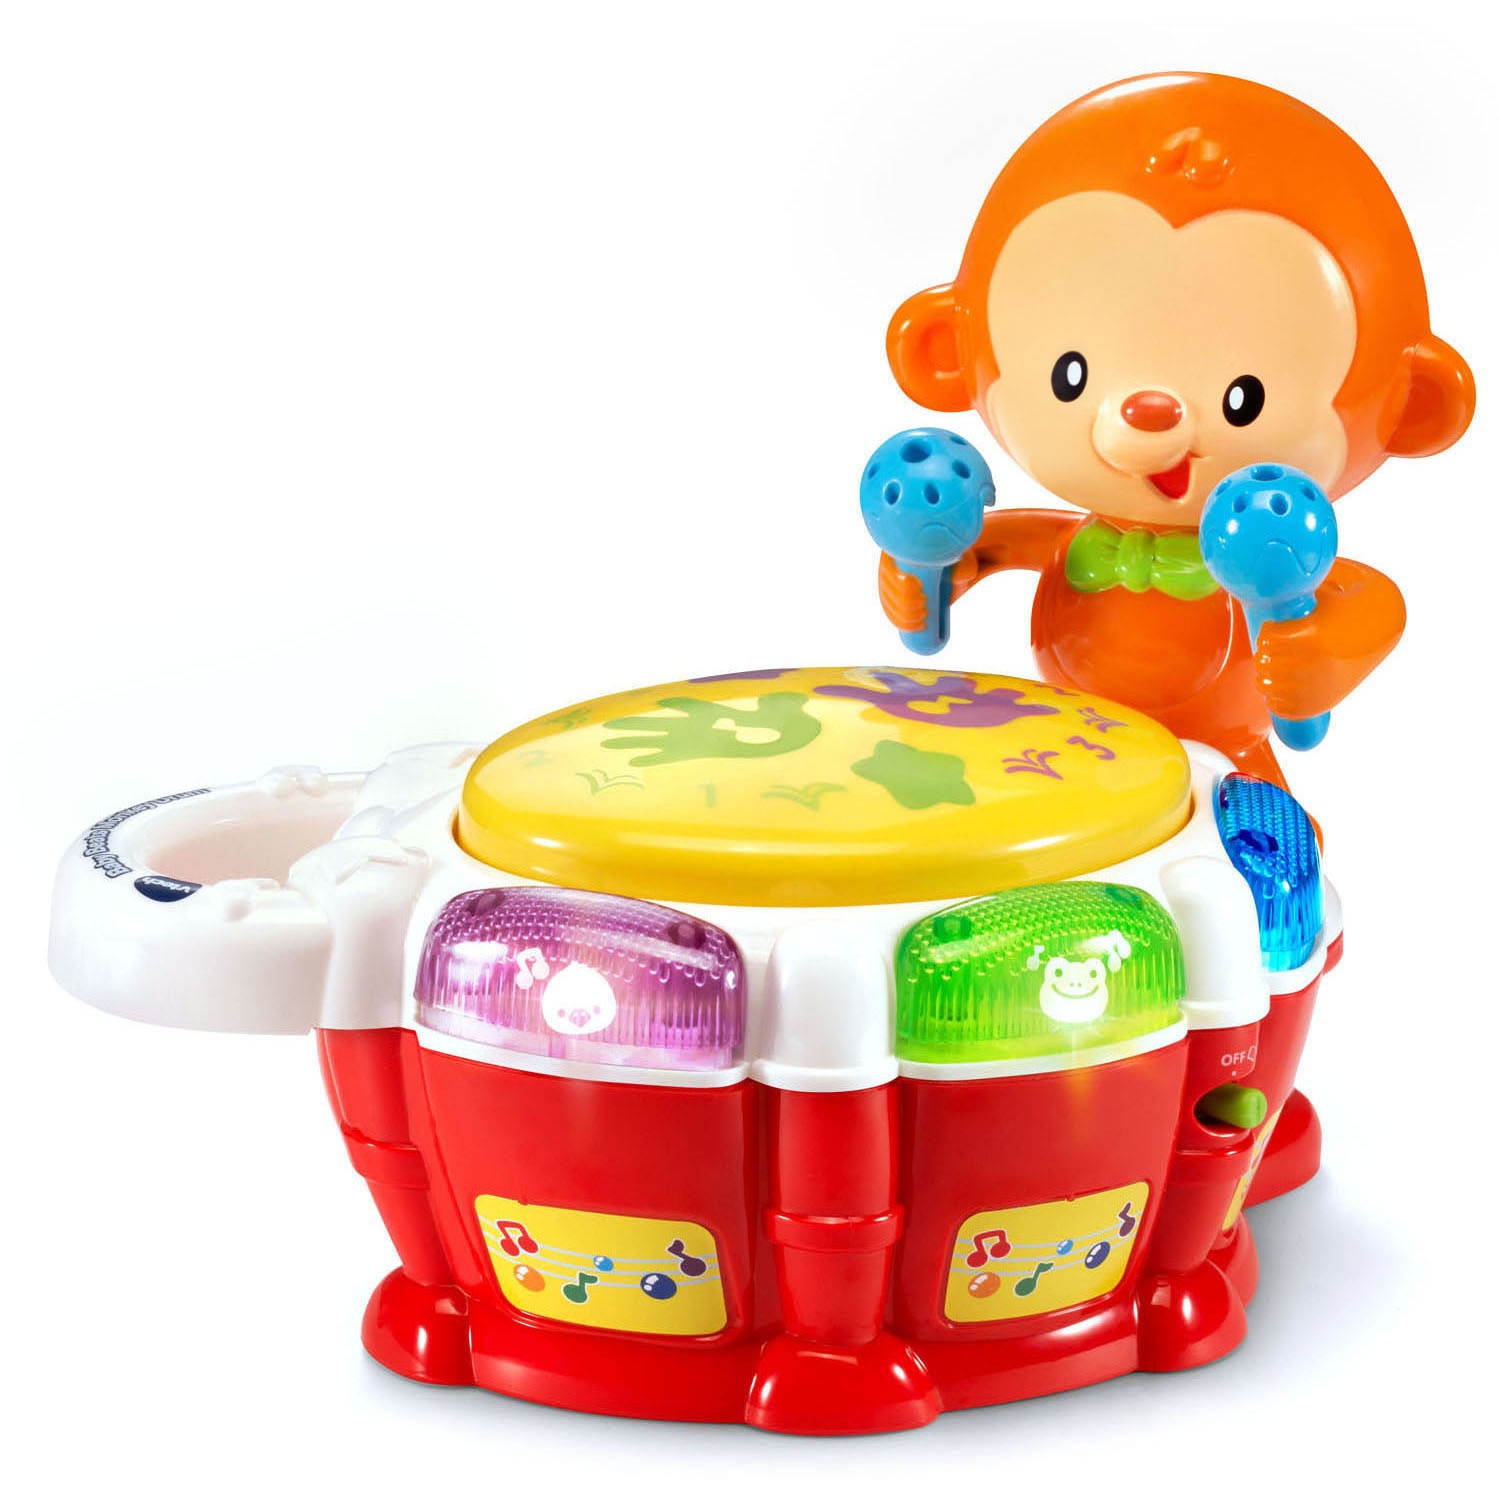 VTech Baby Beats Monkey Drum, Fun Animated Music Toy for Infant - image 1 of 9